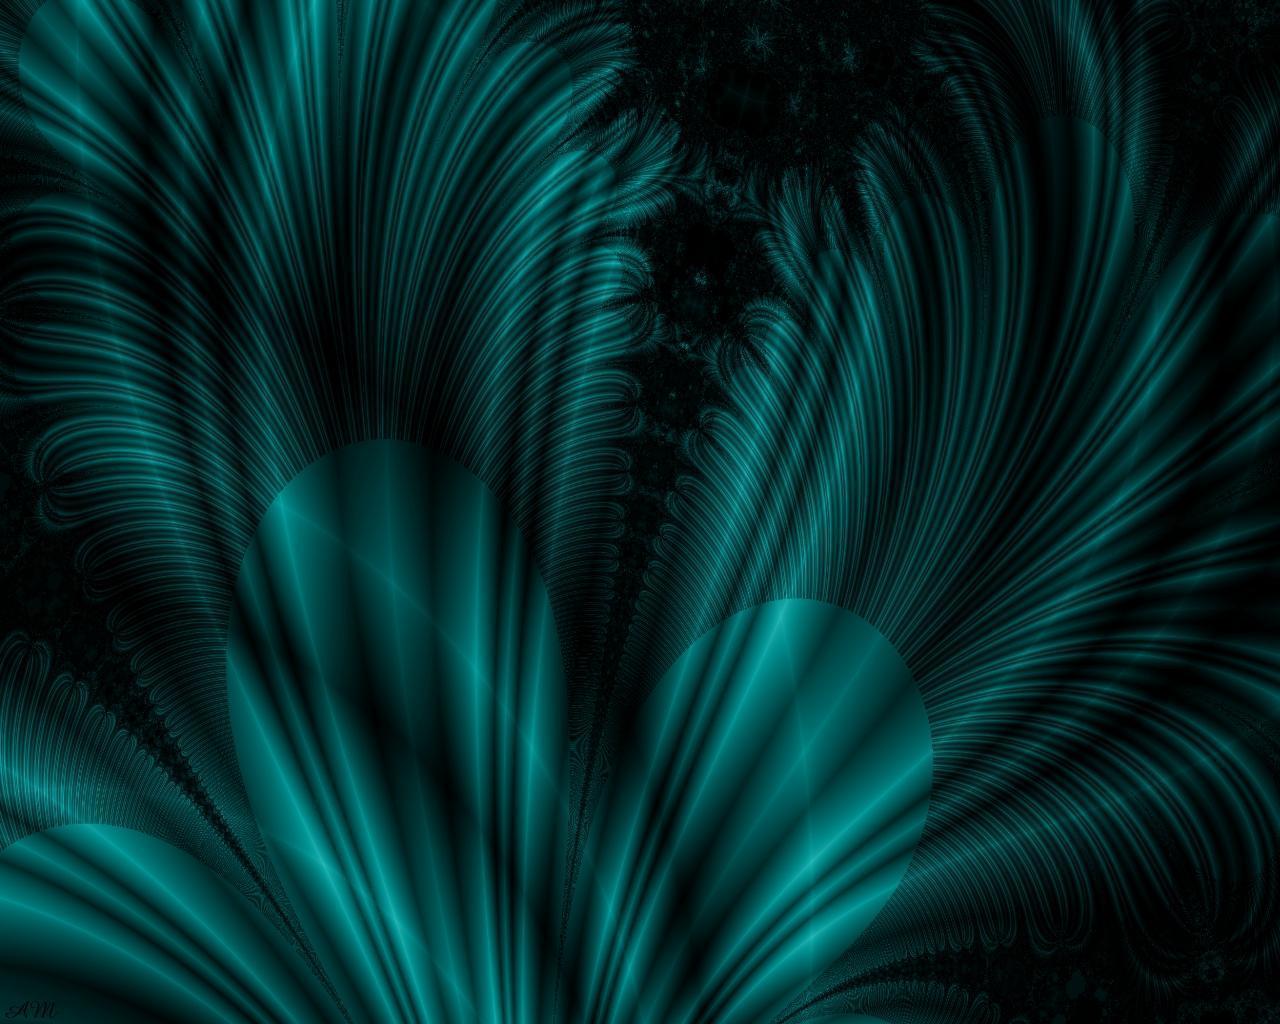 Teal Feather Fan, Desktop and mobile wallpaper